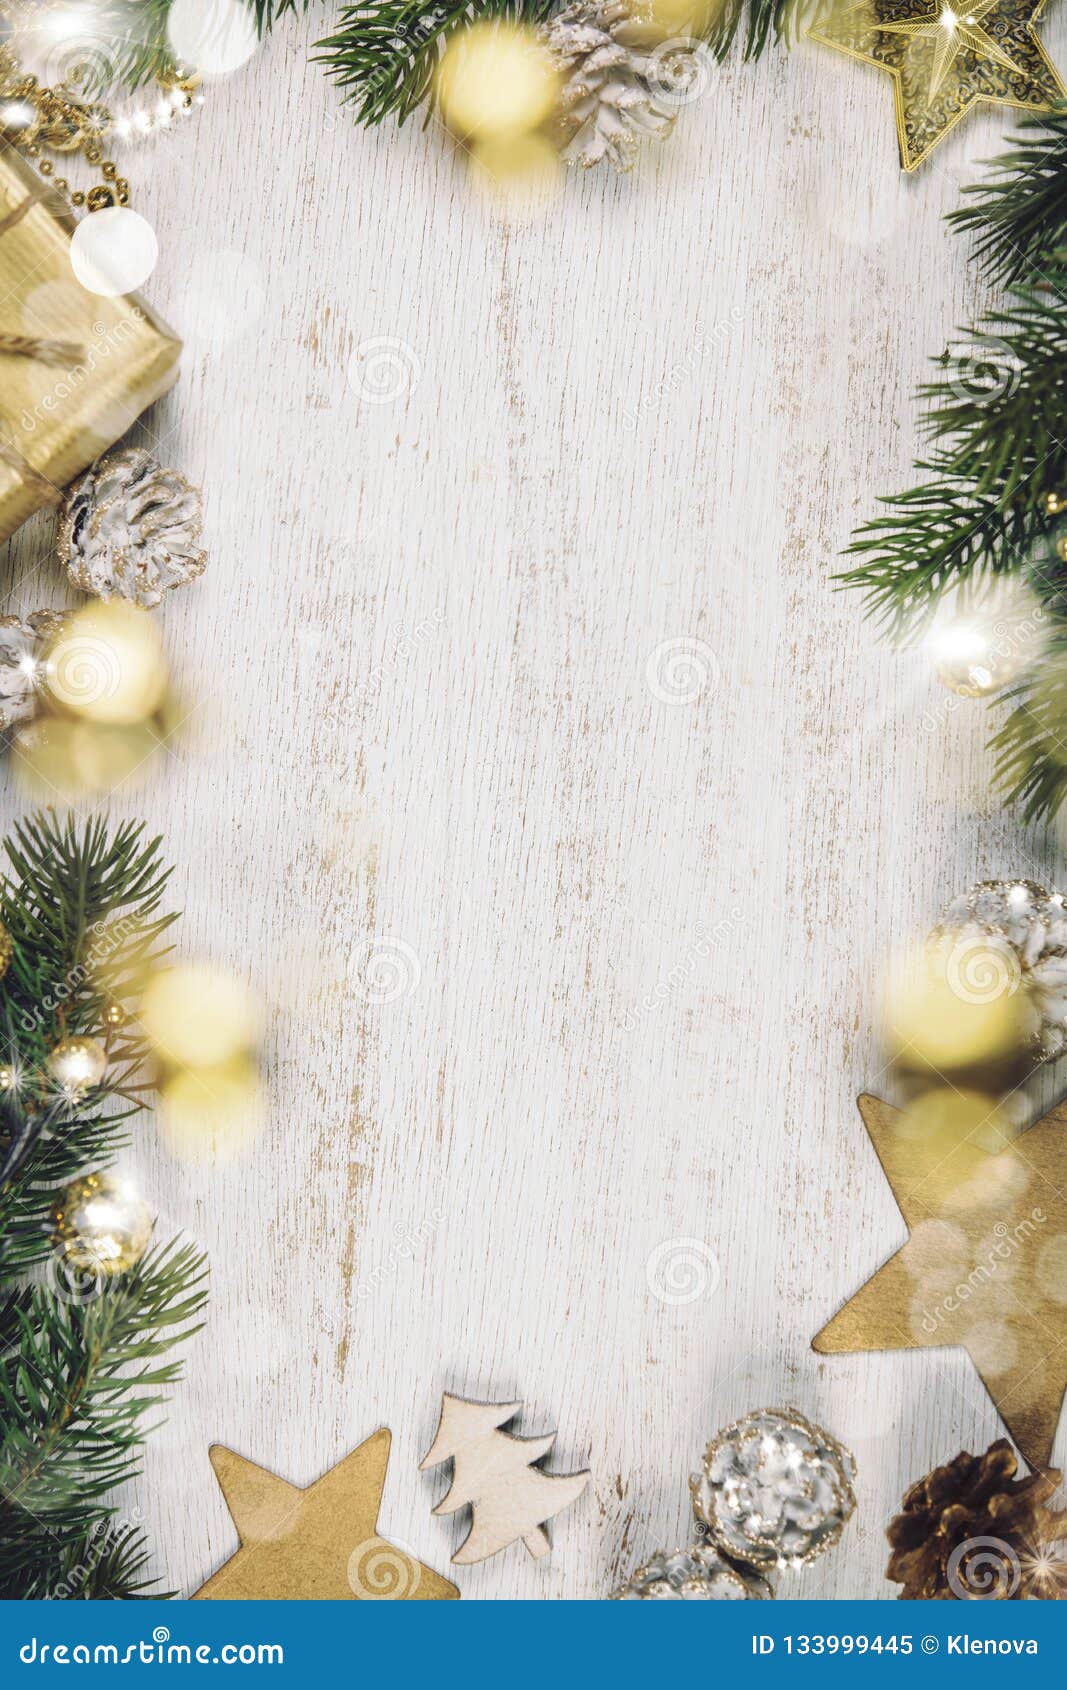 Rustic Wood Background for Christmas with Copy Space Stock Image ...